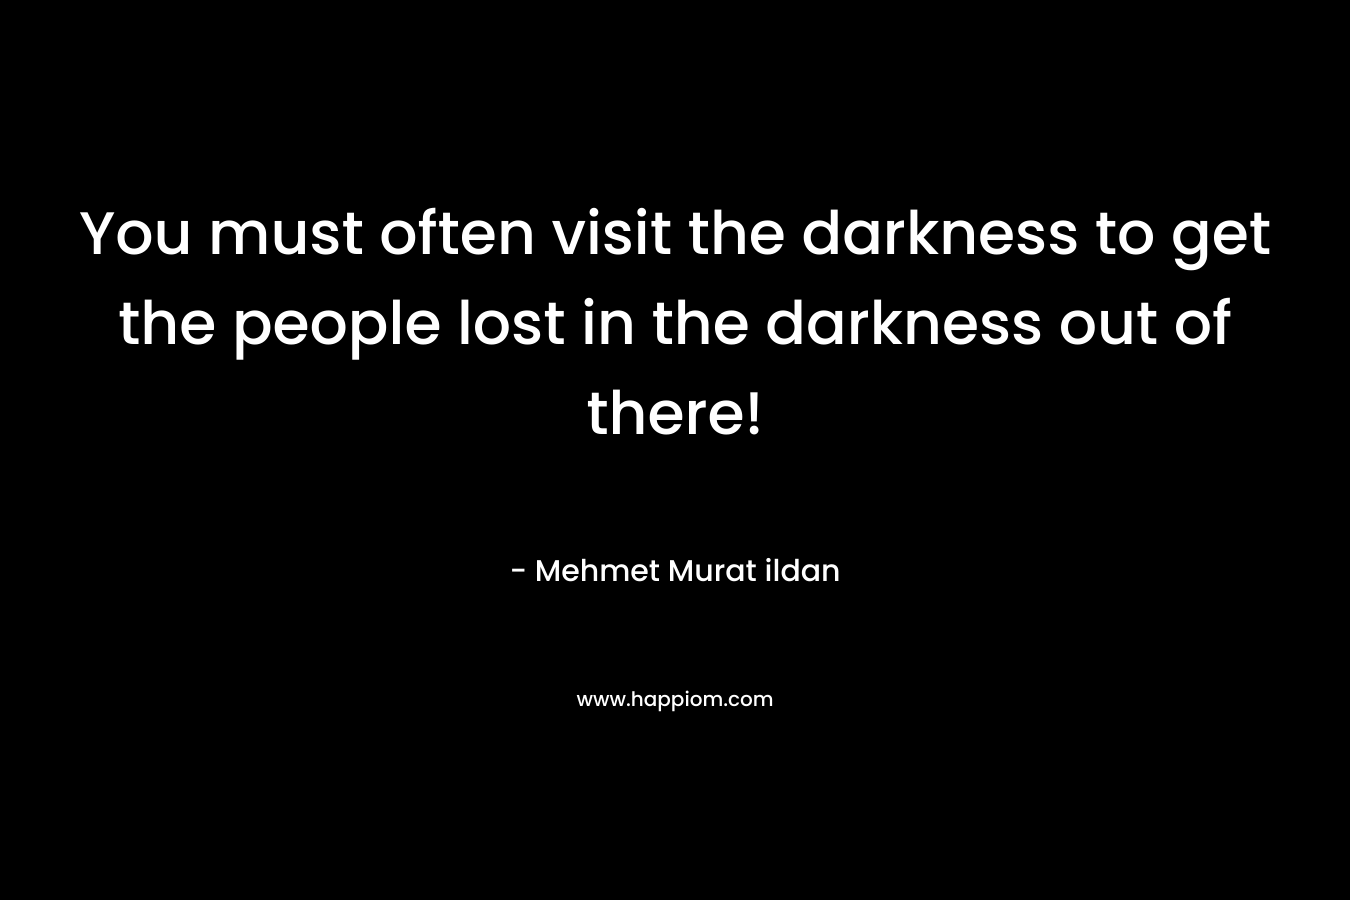 You must often visit the darkness to get the people lost in the darkness out of there!